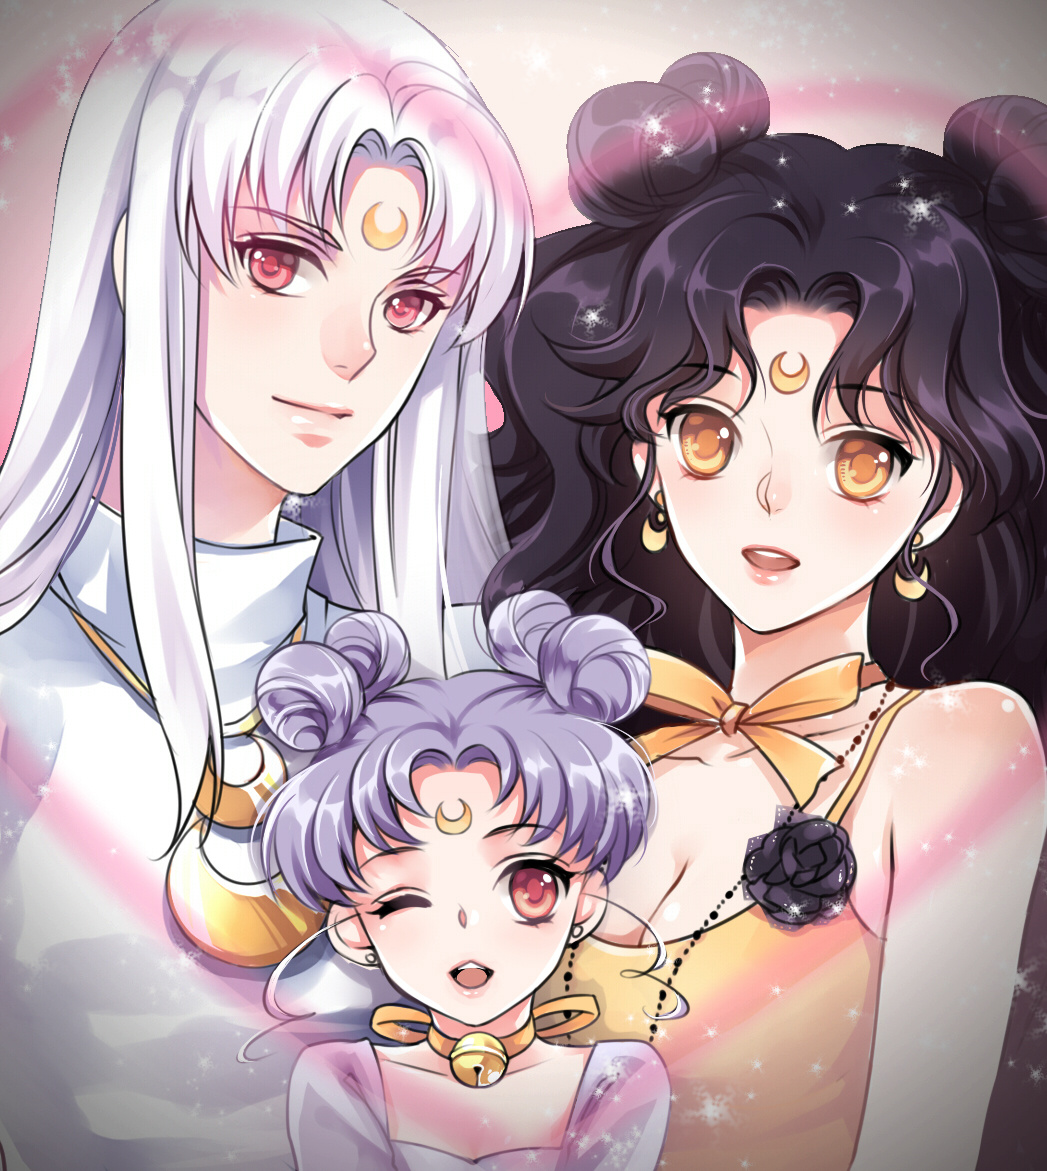 1boy 2girls artemis_(sailor_moon) bell bishoujo_senshi_sailor_moon black_hair choker crescent diana_(sailor_moon) facial_mark father_and_daughter fhalei flower forehead_mark hair_bun jewelry lavender_hair long_hair luna_(sailor_moon) mother_and_daughter multiple_girls necklace personification red_eyes short_hair smile white_hair wink yellow_eyes